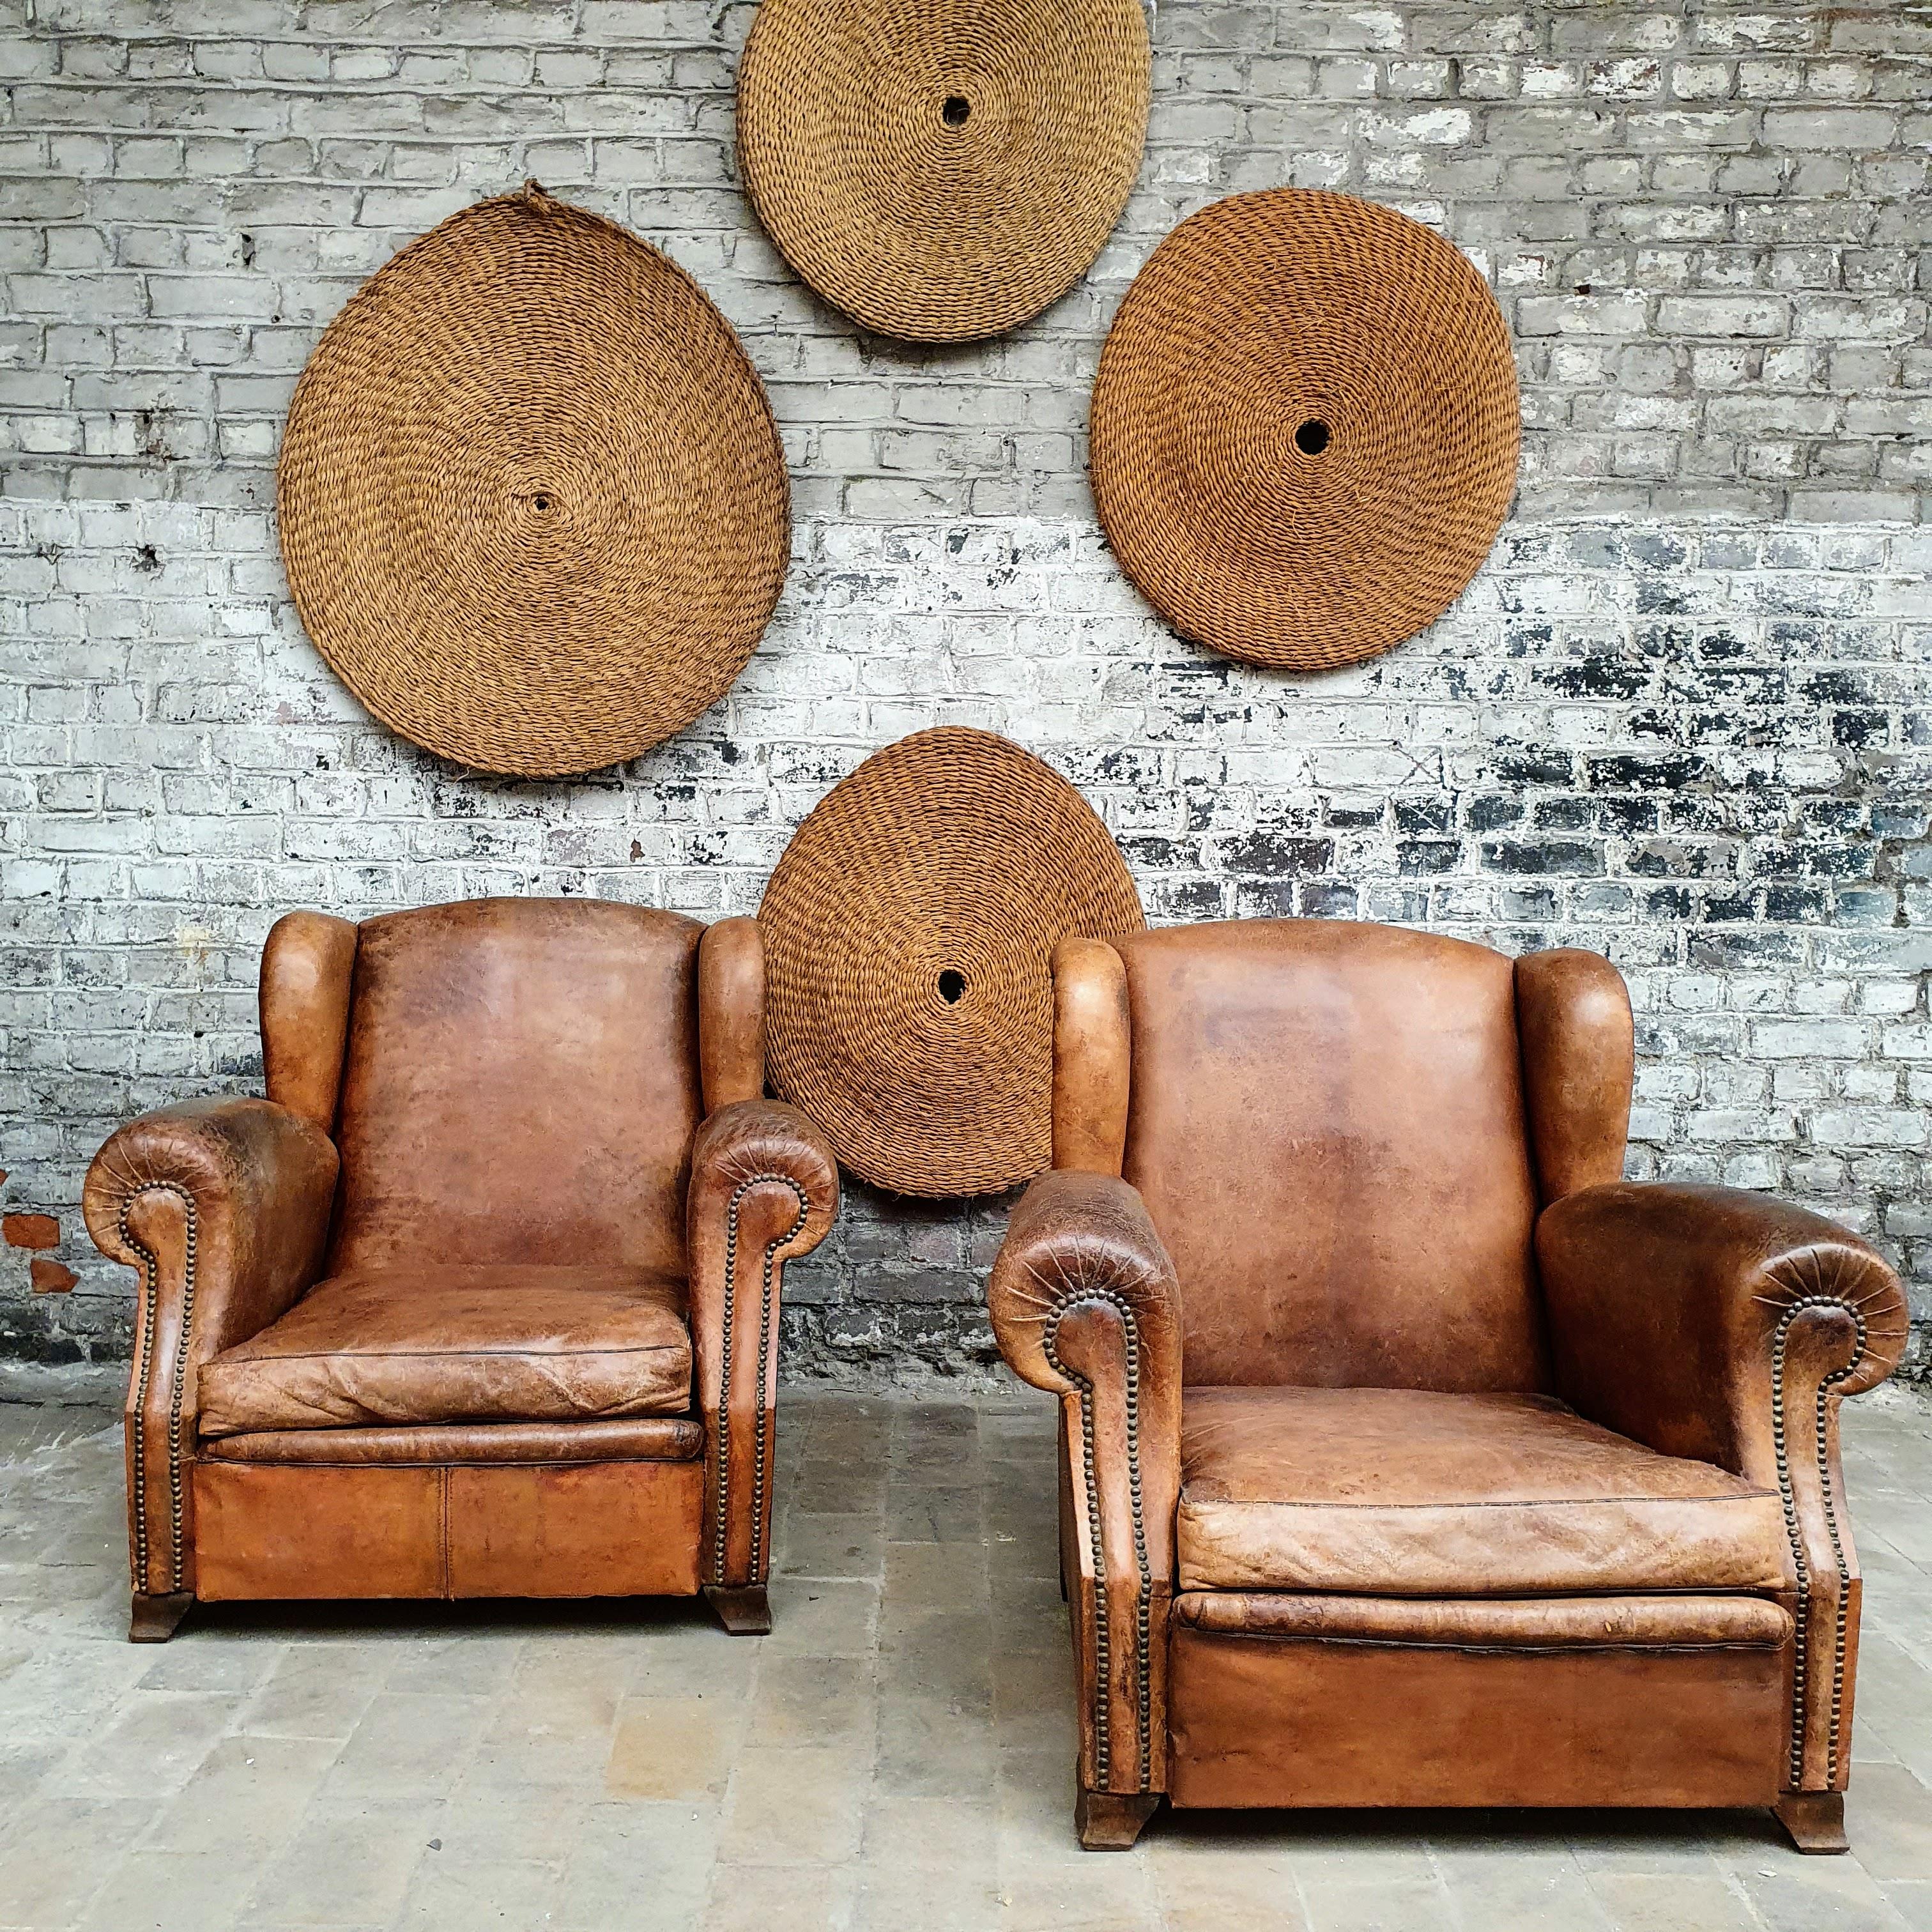 1930 comfortable Havana-colored leather club armchairs.
Restored.